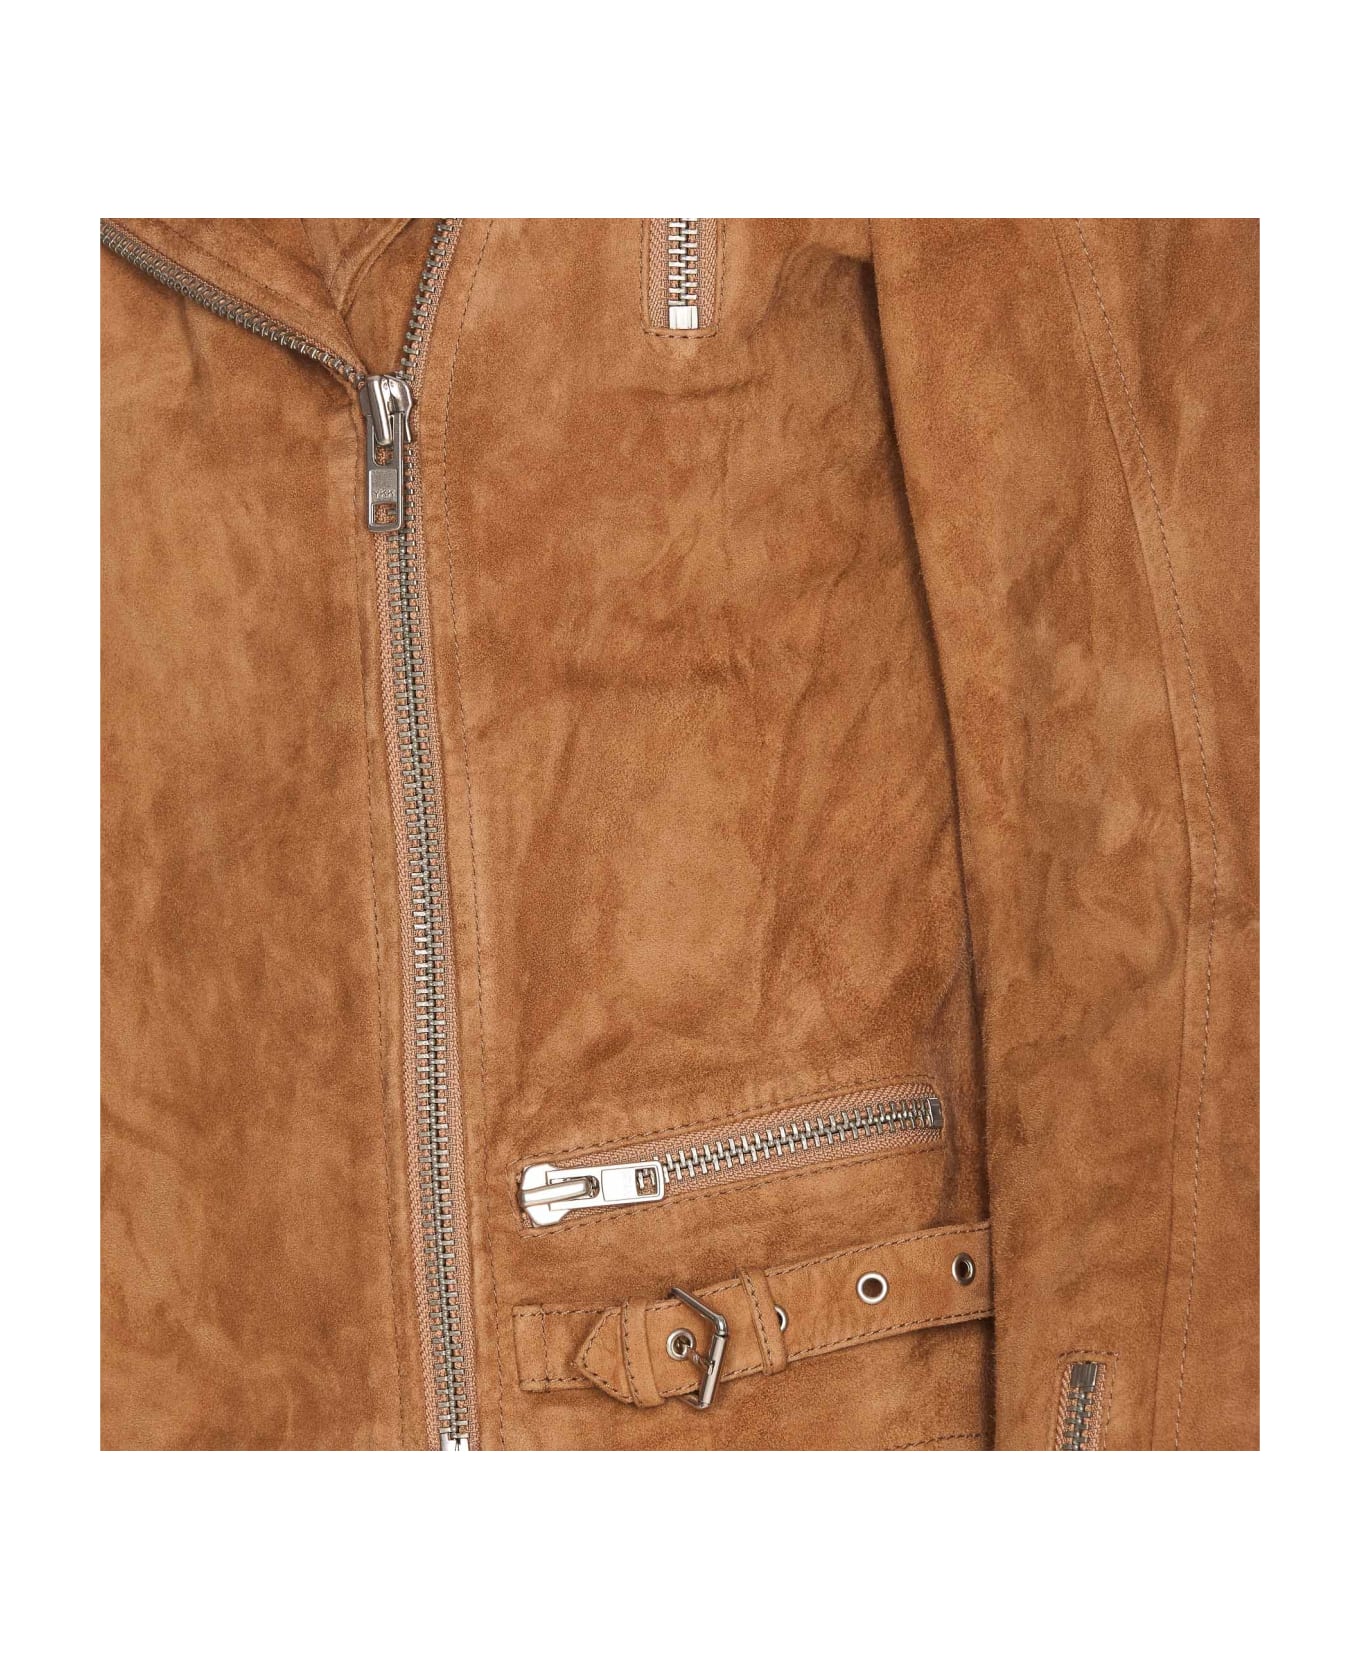 S.W.O.R.D 6.6.44 Suede Jacket - Brown レザージャケット